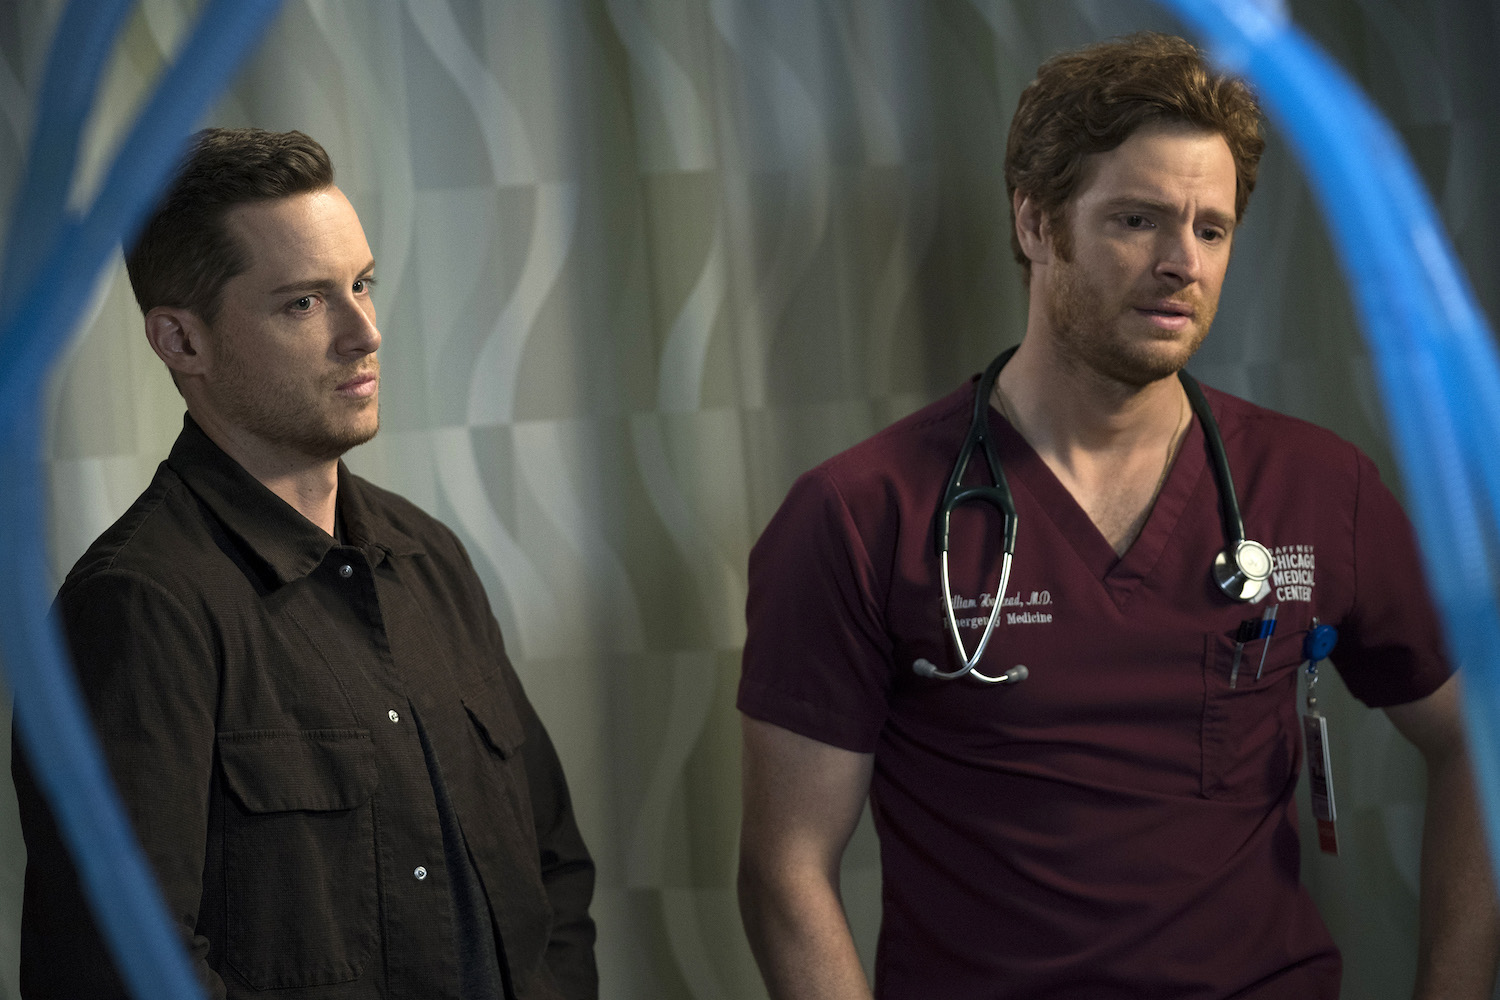 Jesse Lee Soffer as Jay Halstead from 'Chicago P.D.' Season 10 standing next to Nick Gehlfuss as Will Halstead in 'Chicago Med'